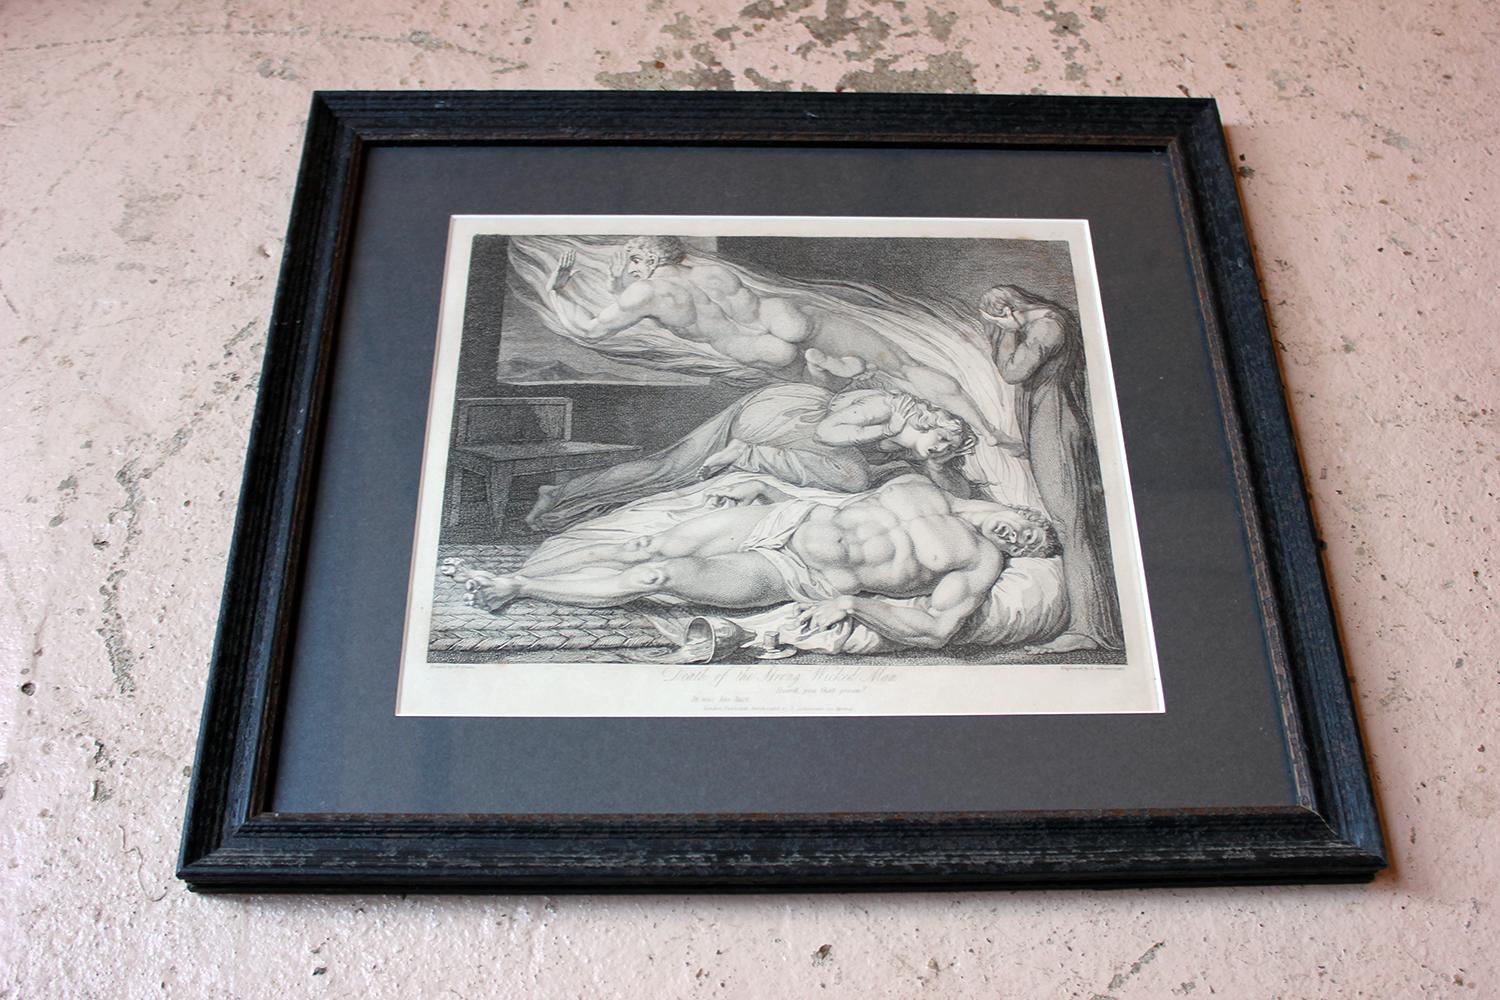 Parchment Paper Group of 9 William Blake Artworks, 6 Engravings & 3 Watercolors